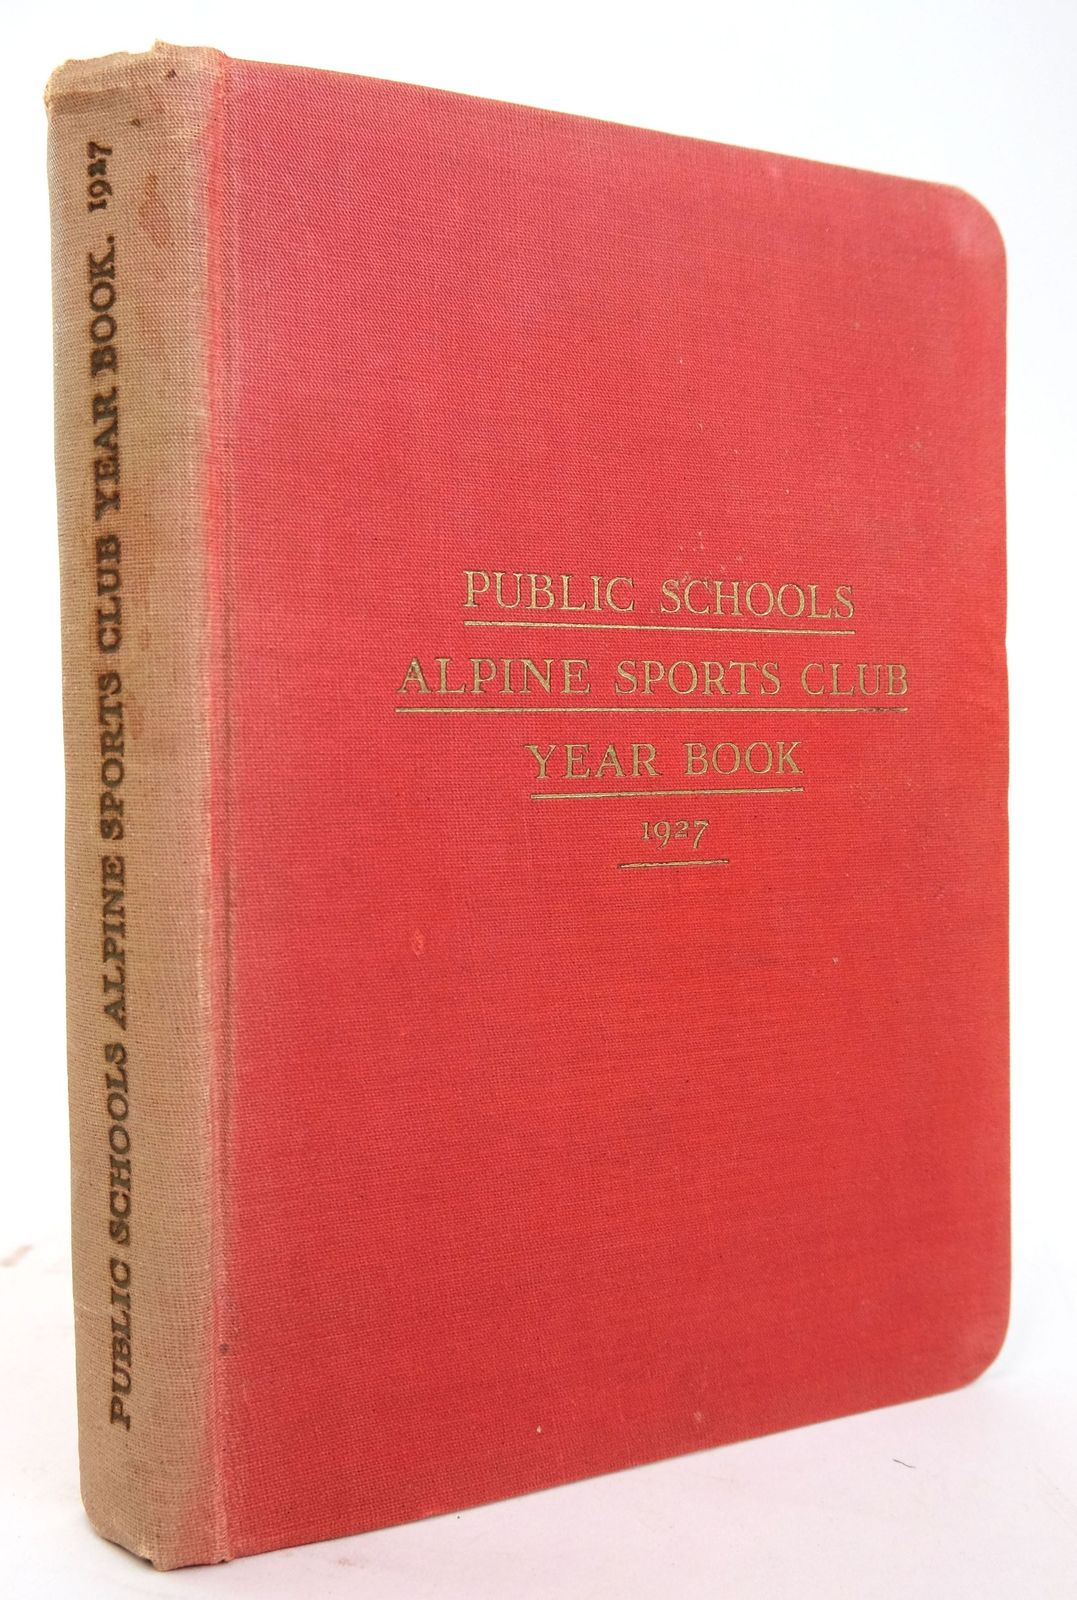 Photo of PUBLIC SCHOOLS ALPINE SPORTS CLUB YEAR BOOK 1927- Stock Number: 1820174